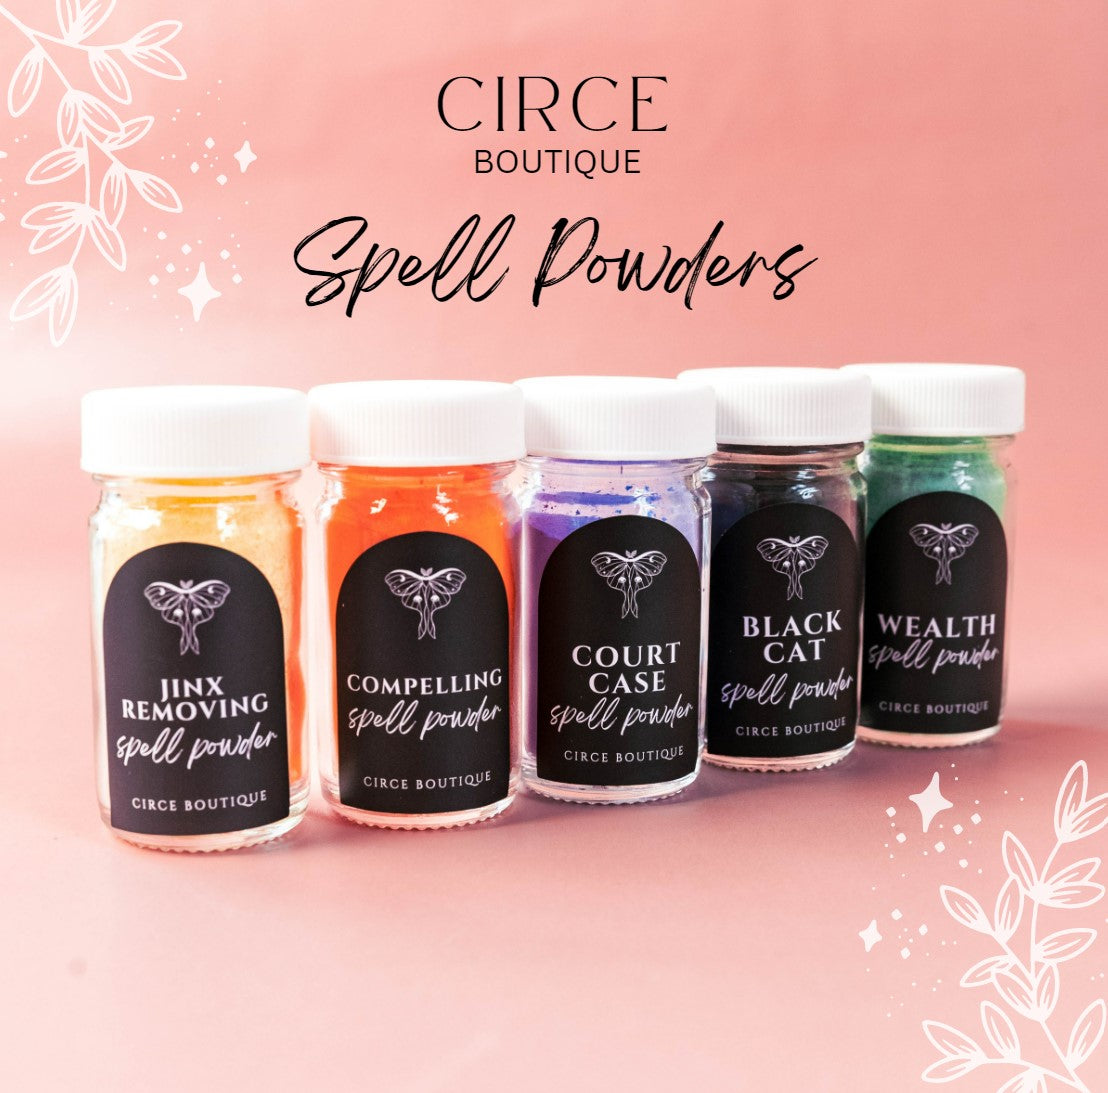 CIRCE Protection Spell Powder 1.25 oz. -  Spell Powder  from CirceBoutique